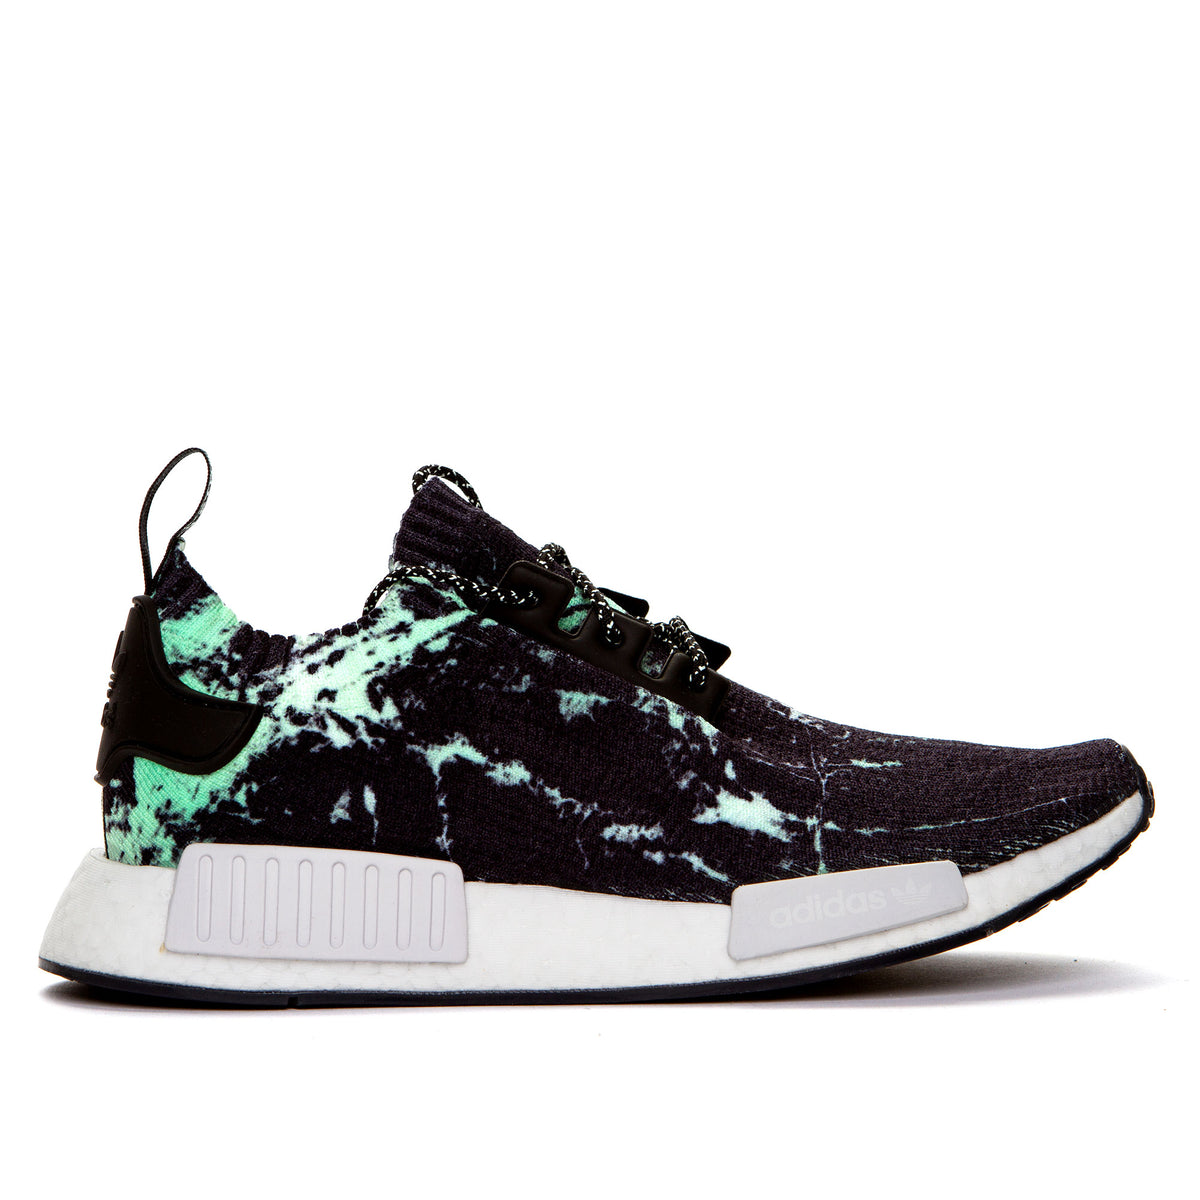 Adidas NMD_R1 Primeknit Shoes "Green Marble"